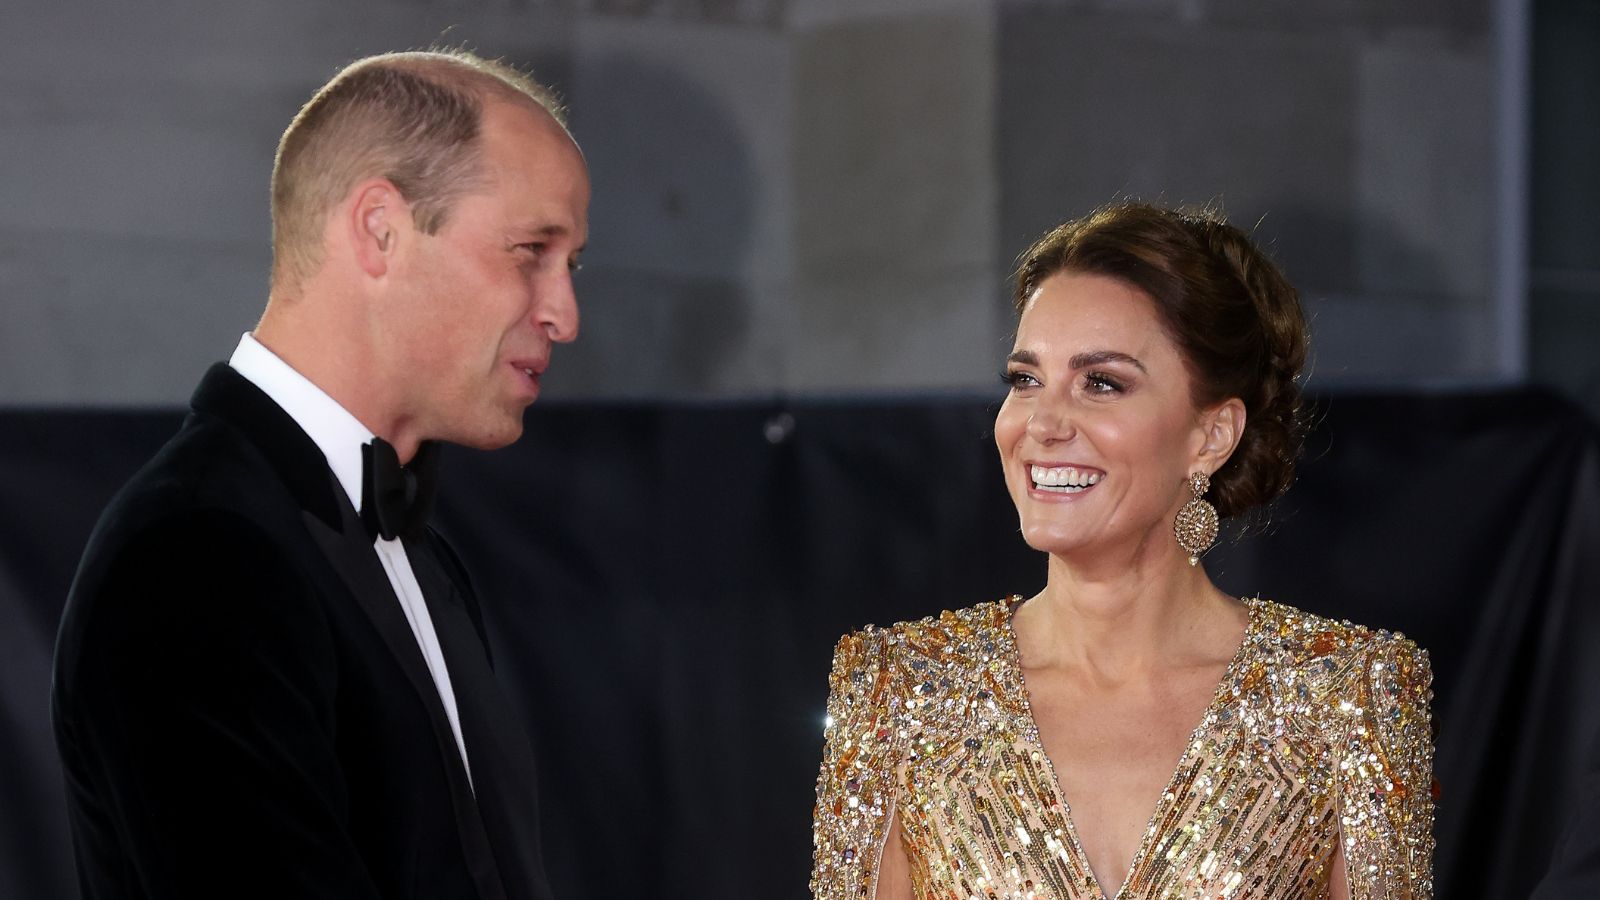 Kate Middleton and Prince William’s relationship in pictures Bond premiere